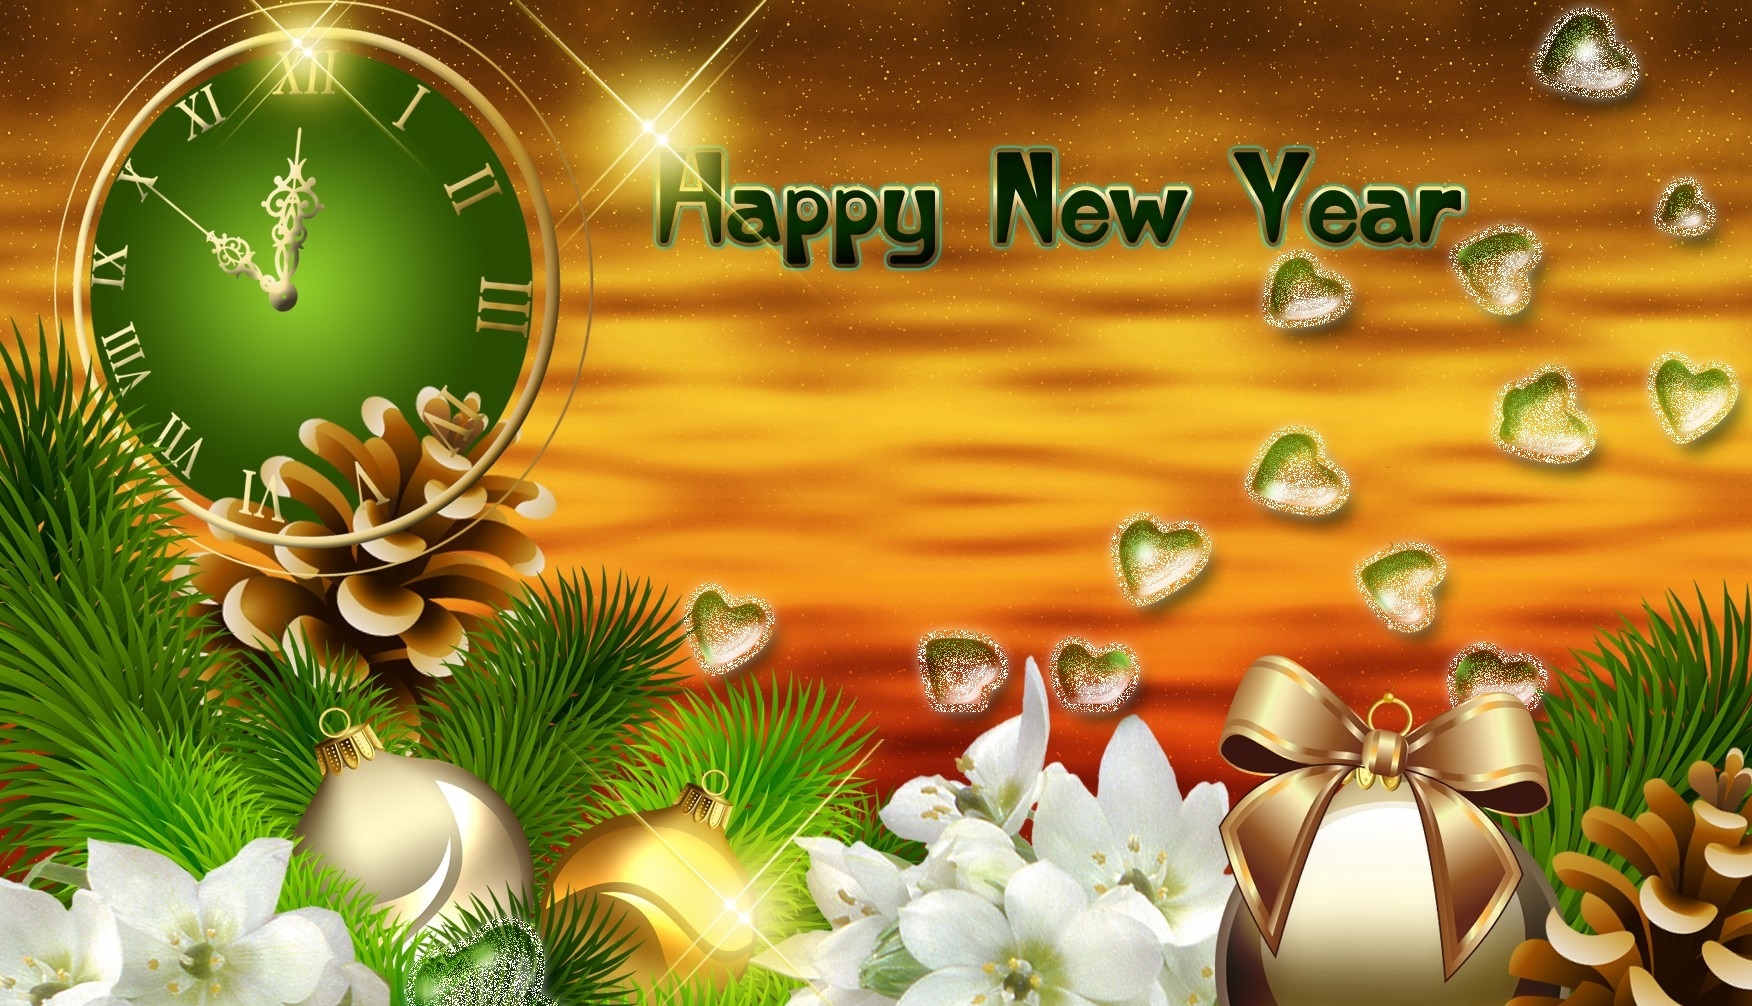 Beautiful Happy New Year hd Images & Wallpapers free download